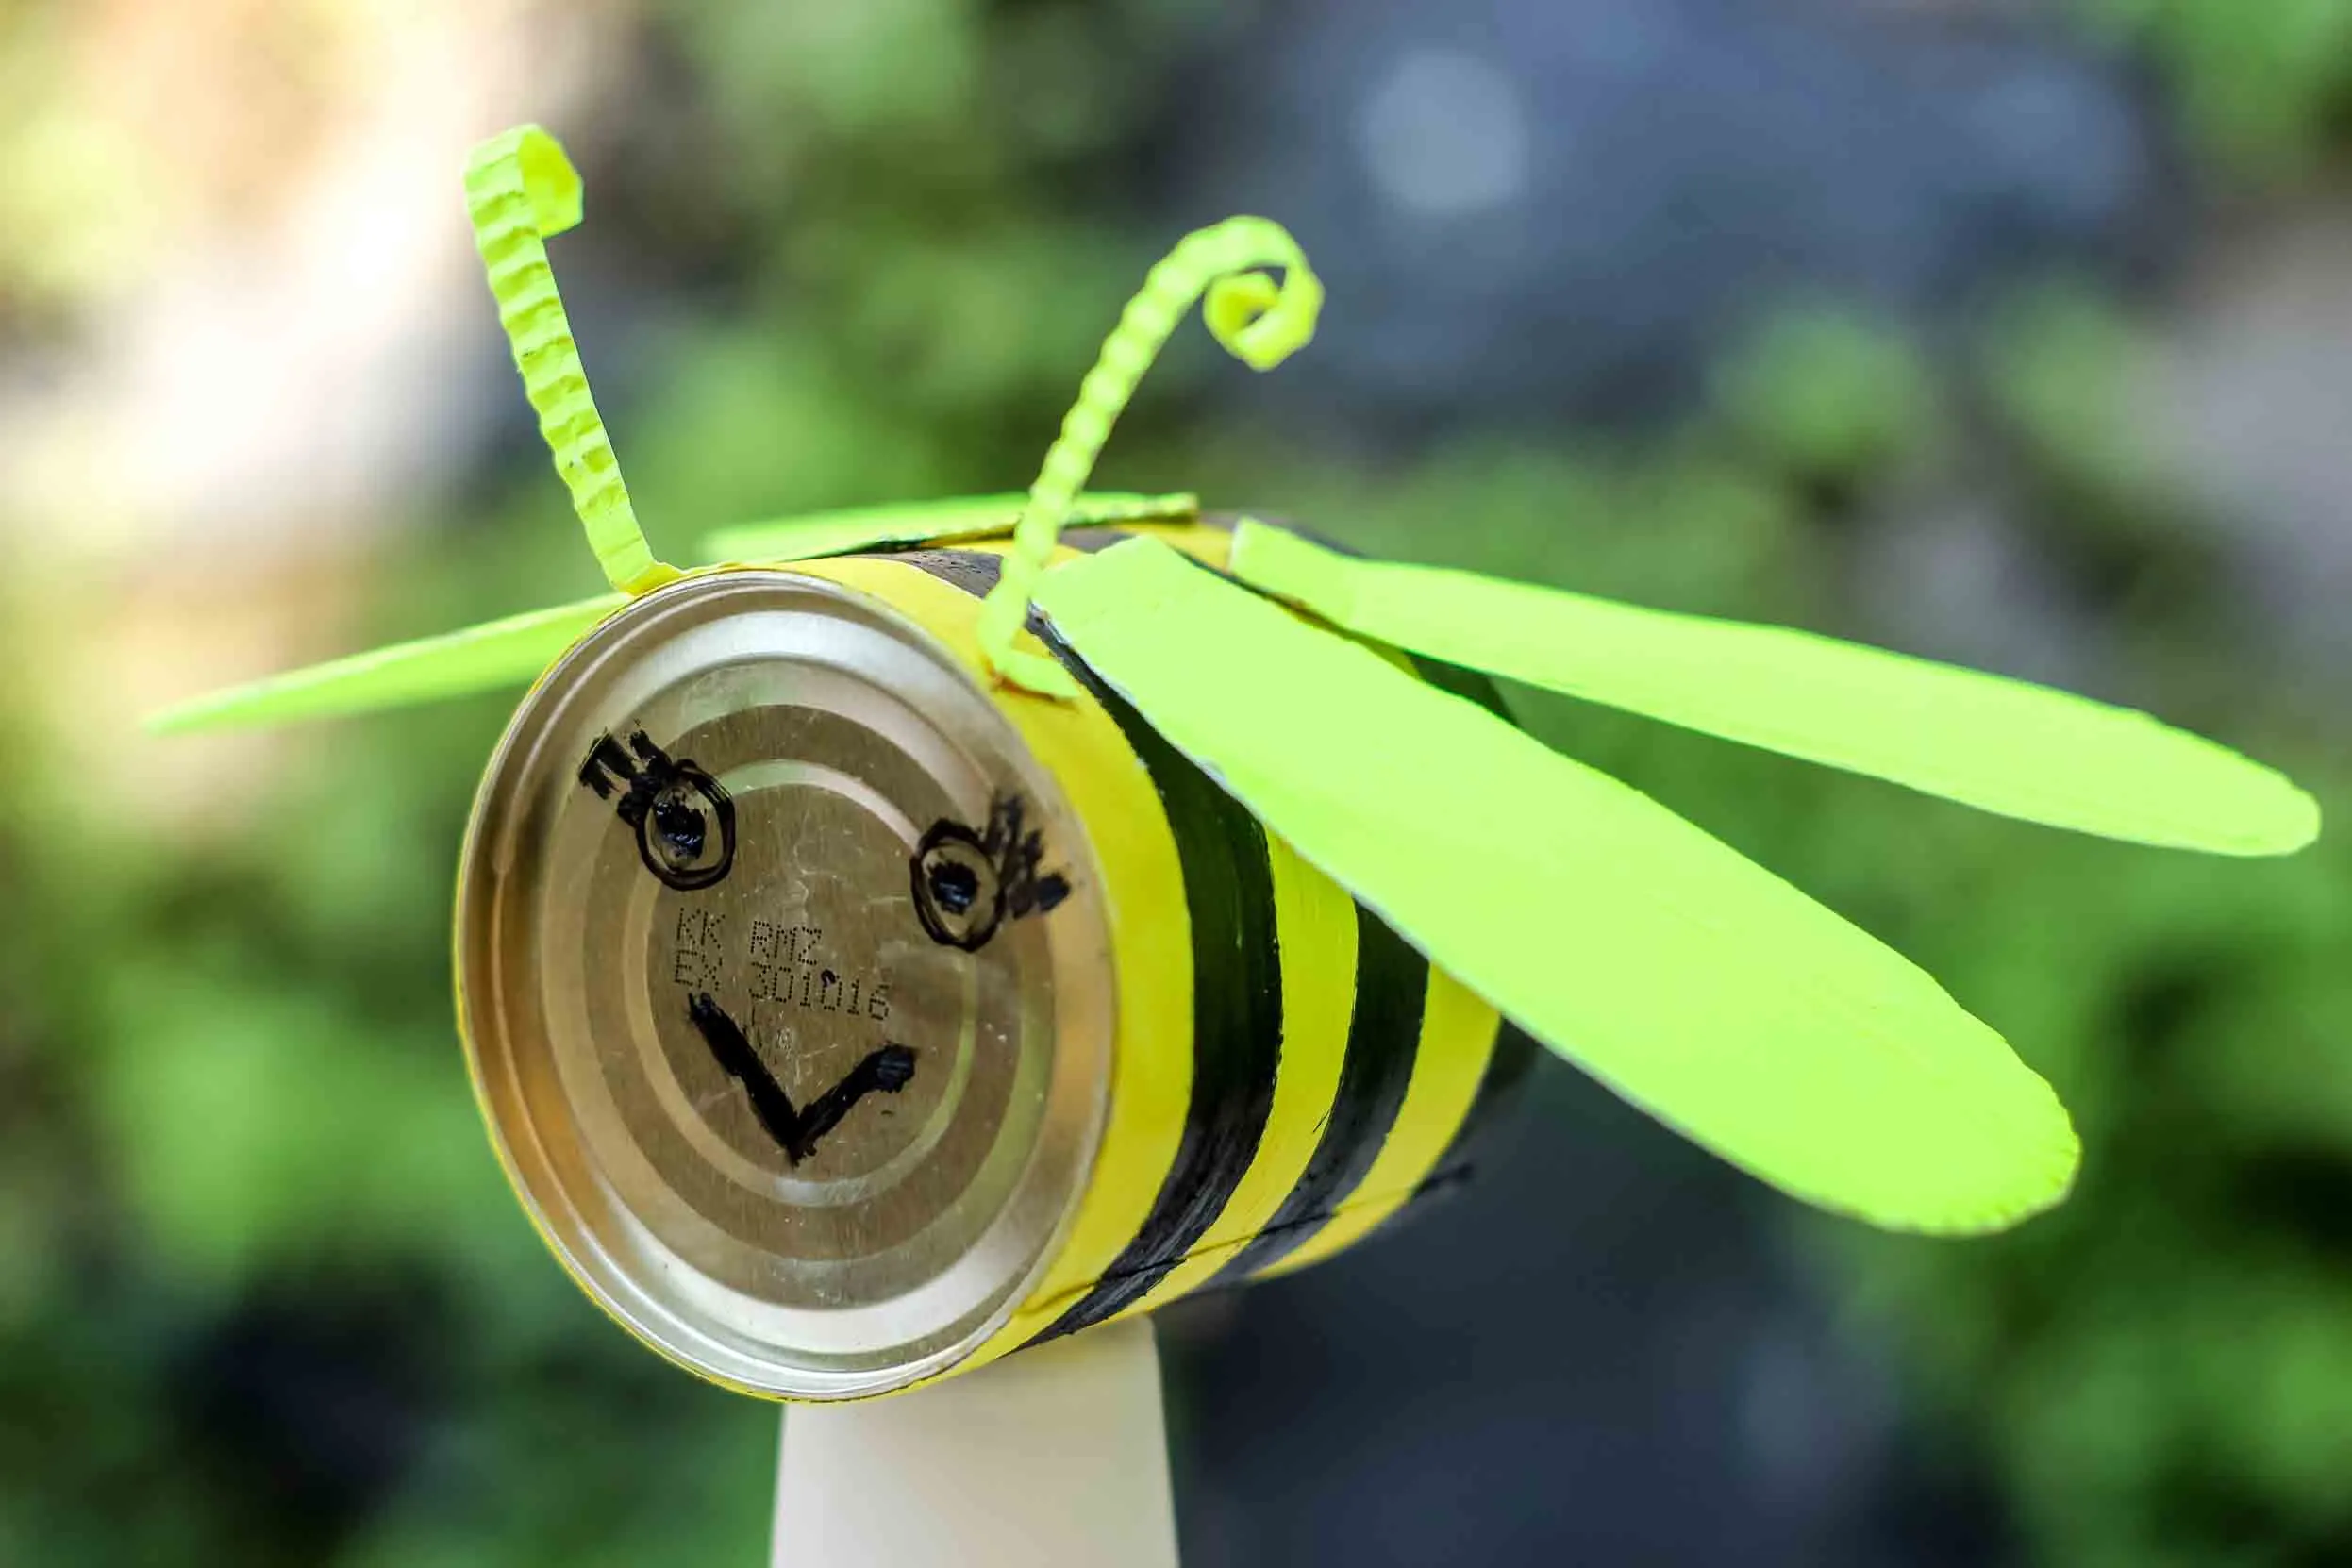 A tin can fashioned to resemble a bee by the addition of paper wings and antenna, the colouring of black and yellow stripes around the curved side of the can, and a face drawn onto the bottom surface.